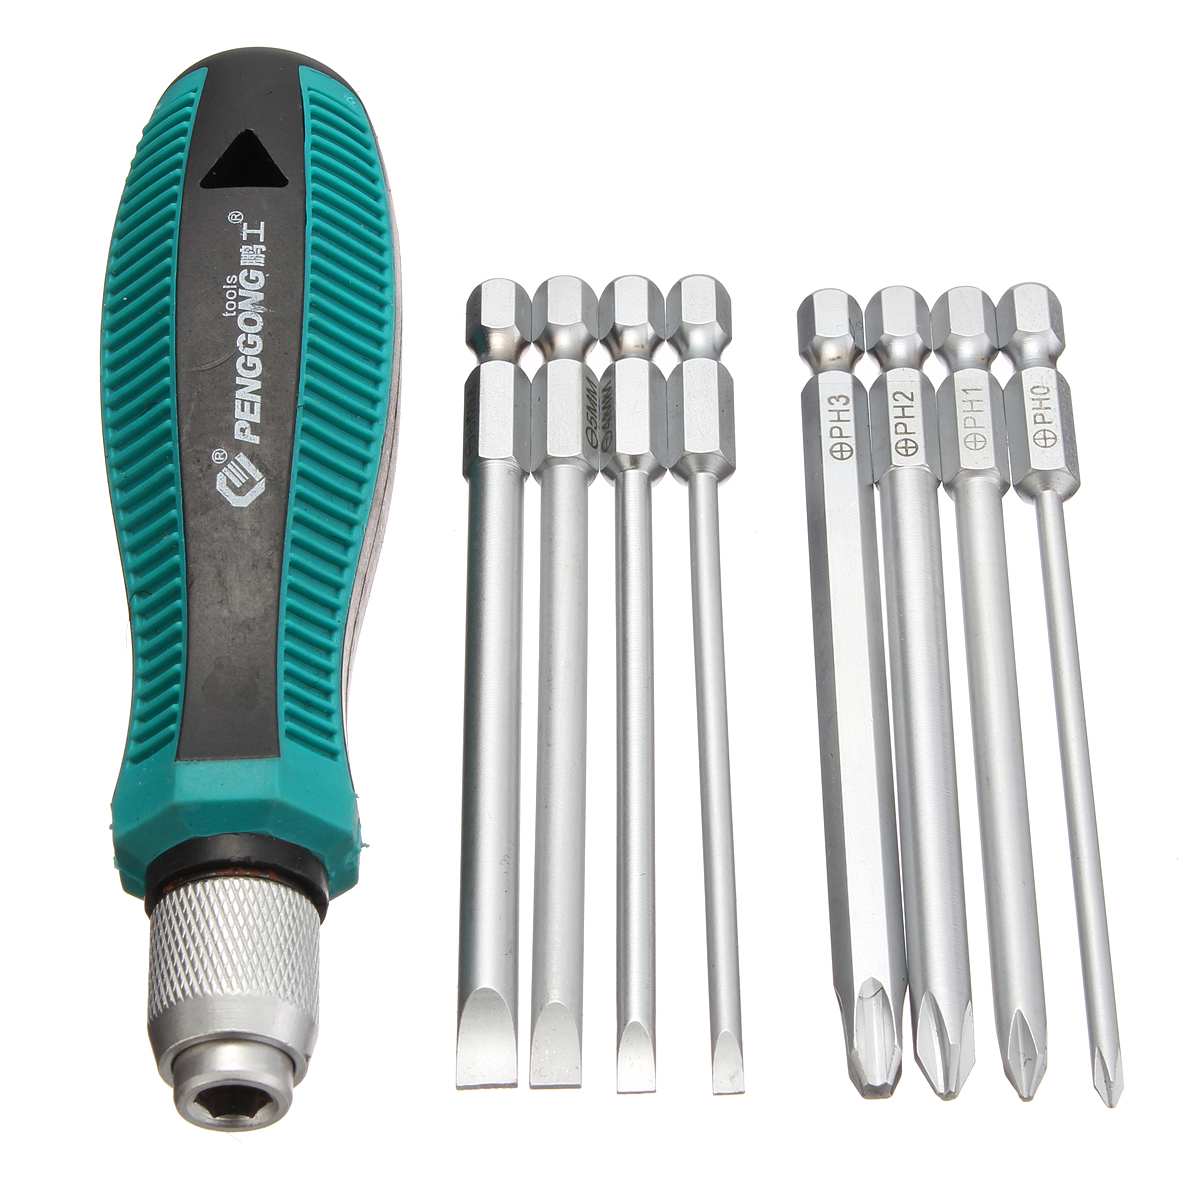 9 in 1 Precision Screwdriver Bit Set Handle Multi-function Screw Driver Magnetic Multi-use Slotted Phillips Hand Tools